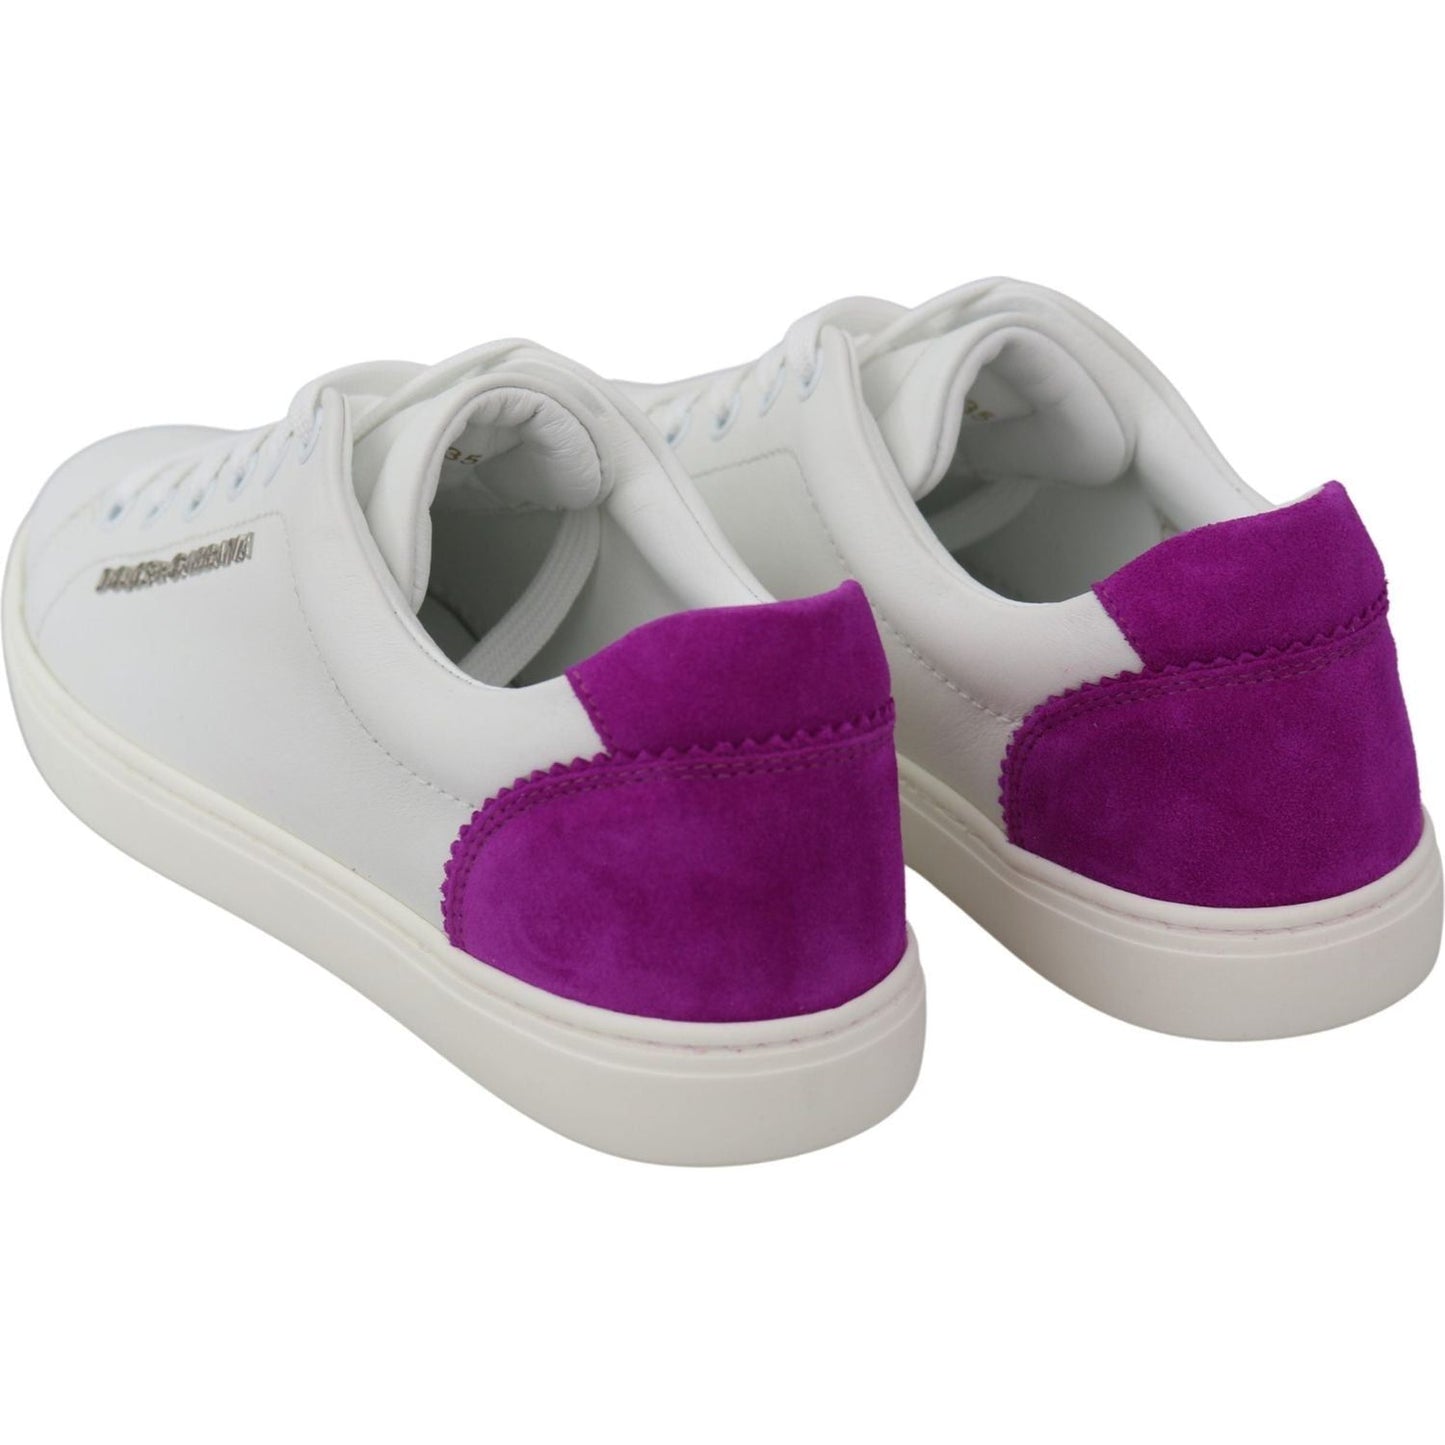 Dolce & Gabbana Chic White Leather Sneakers with Purple Accents WOMAN SNEAKERS white-purple-leather-logo-womens-shoes IMG_9745-scaled-ed9bc8a4-a17.jpg